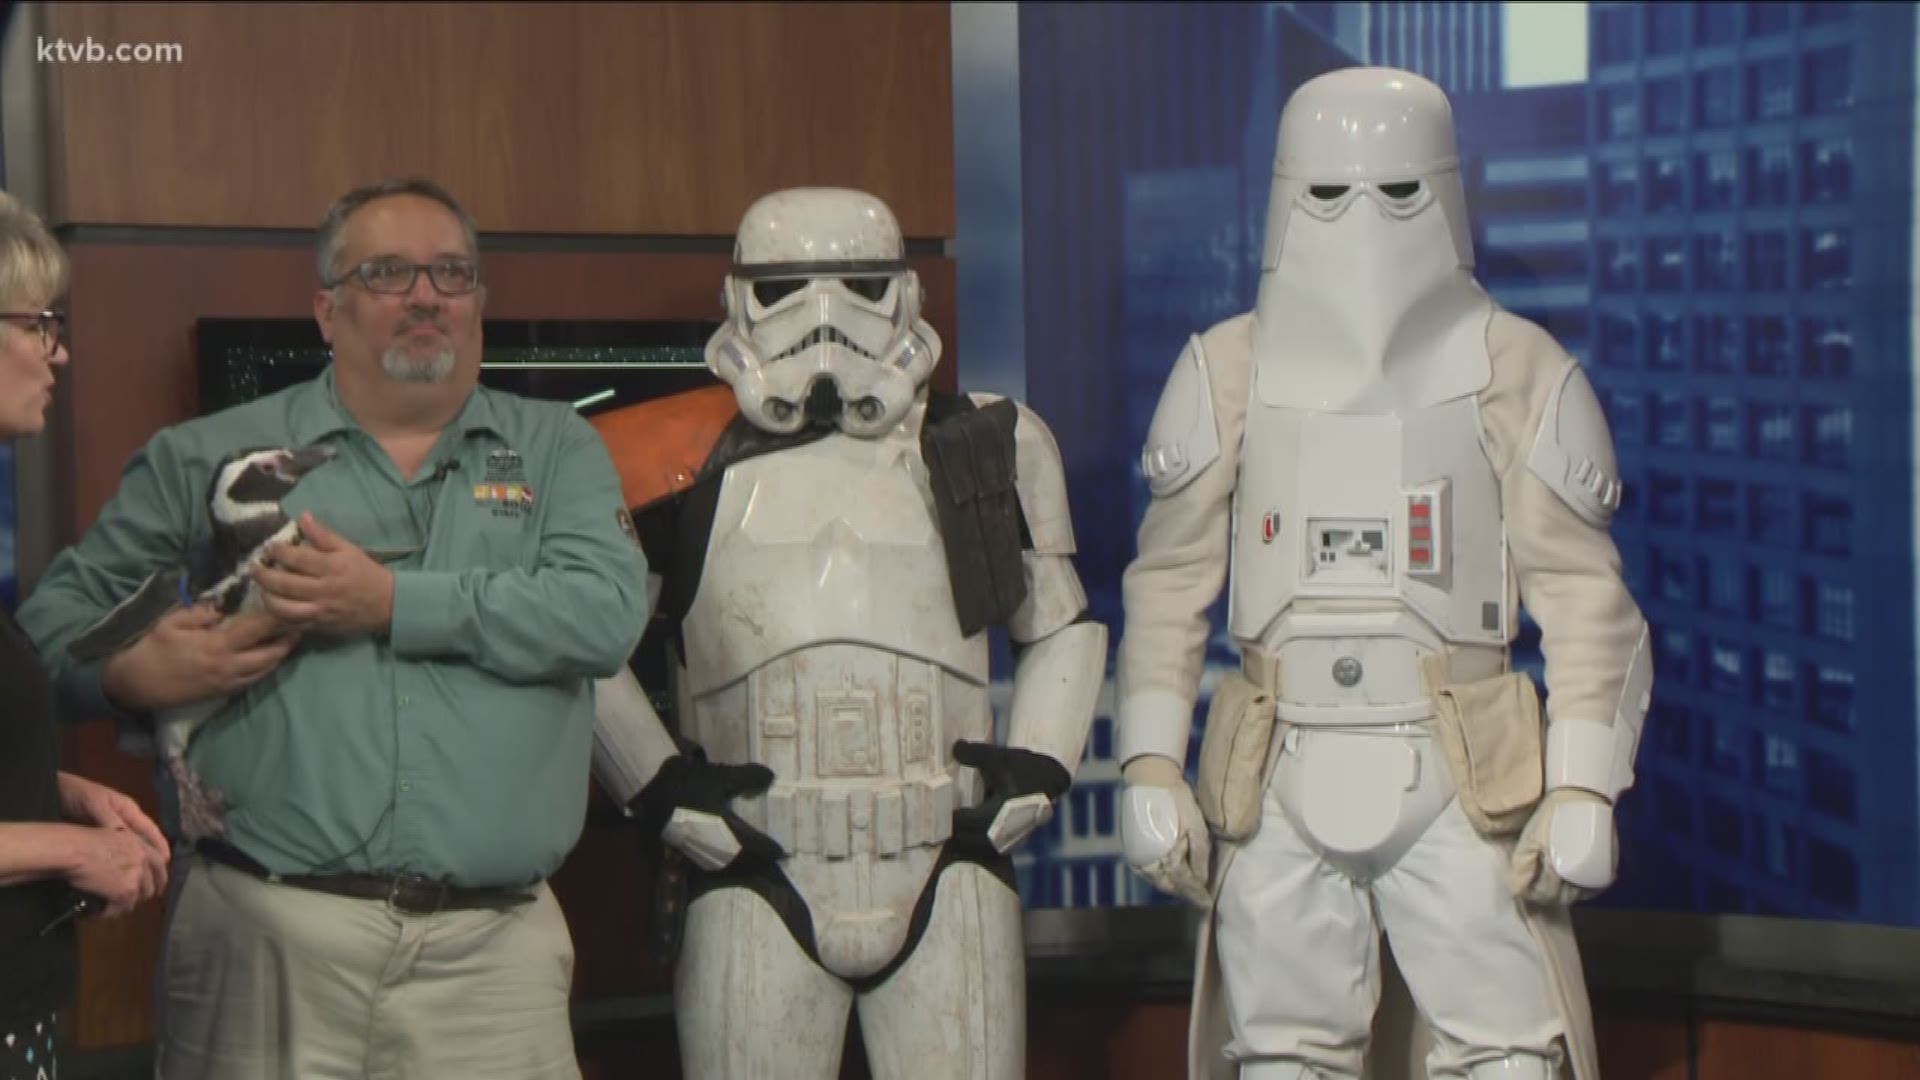 The Star Wars-themed event takes place this Saturday.